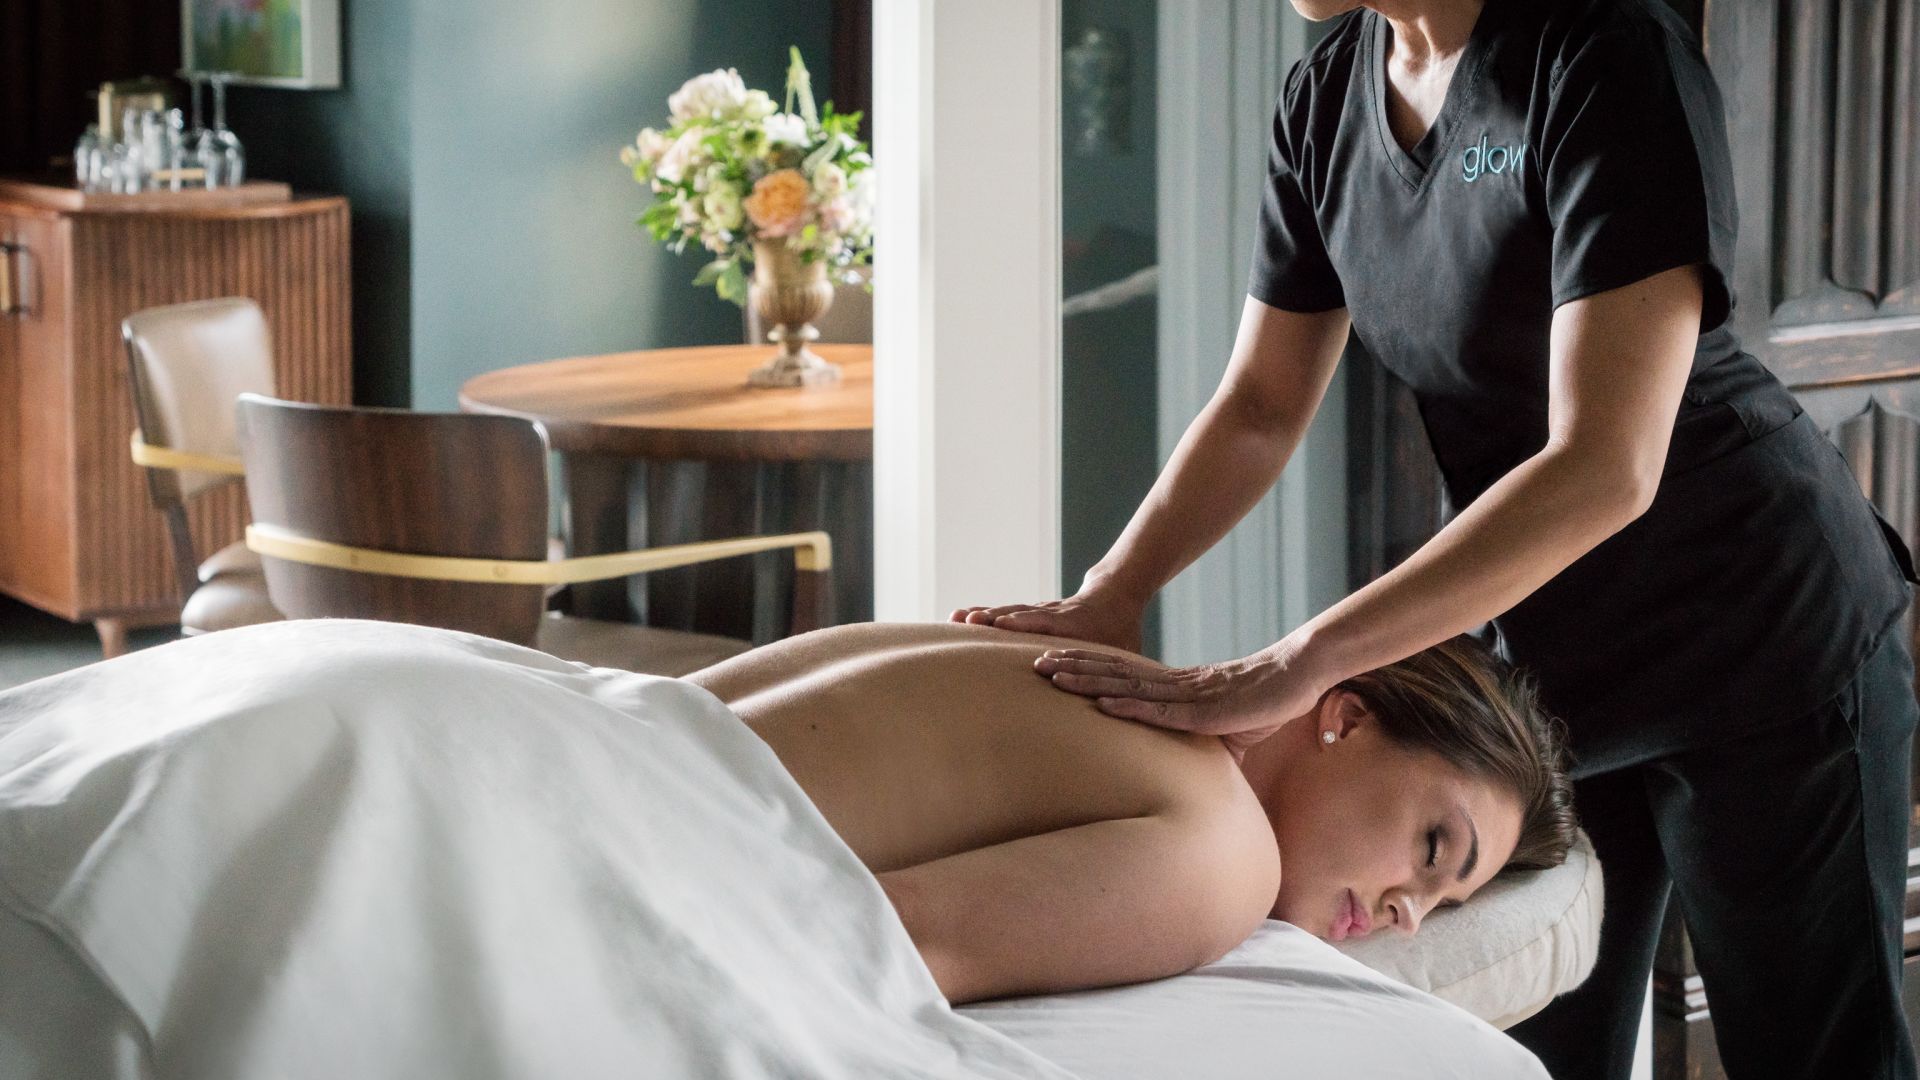 In-room spa service at Perry Lane Hotel